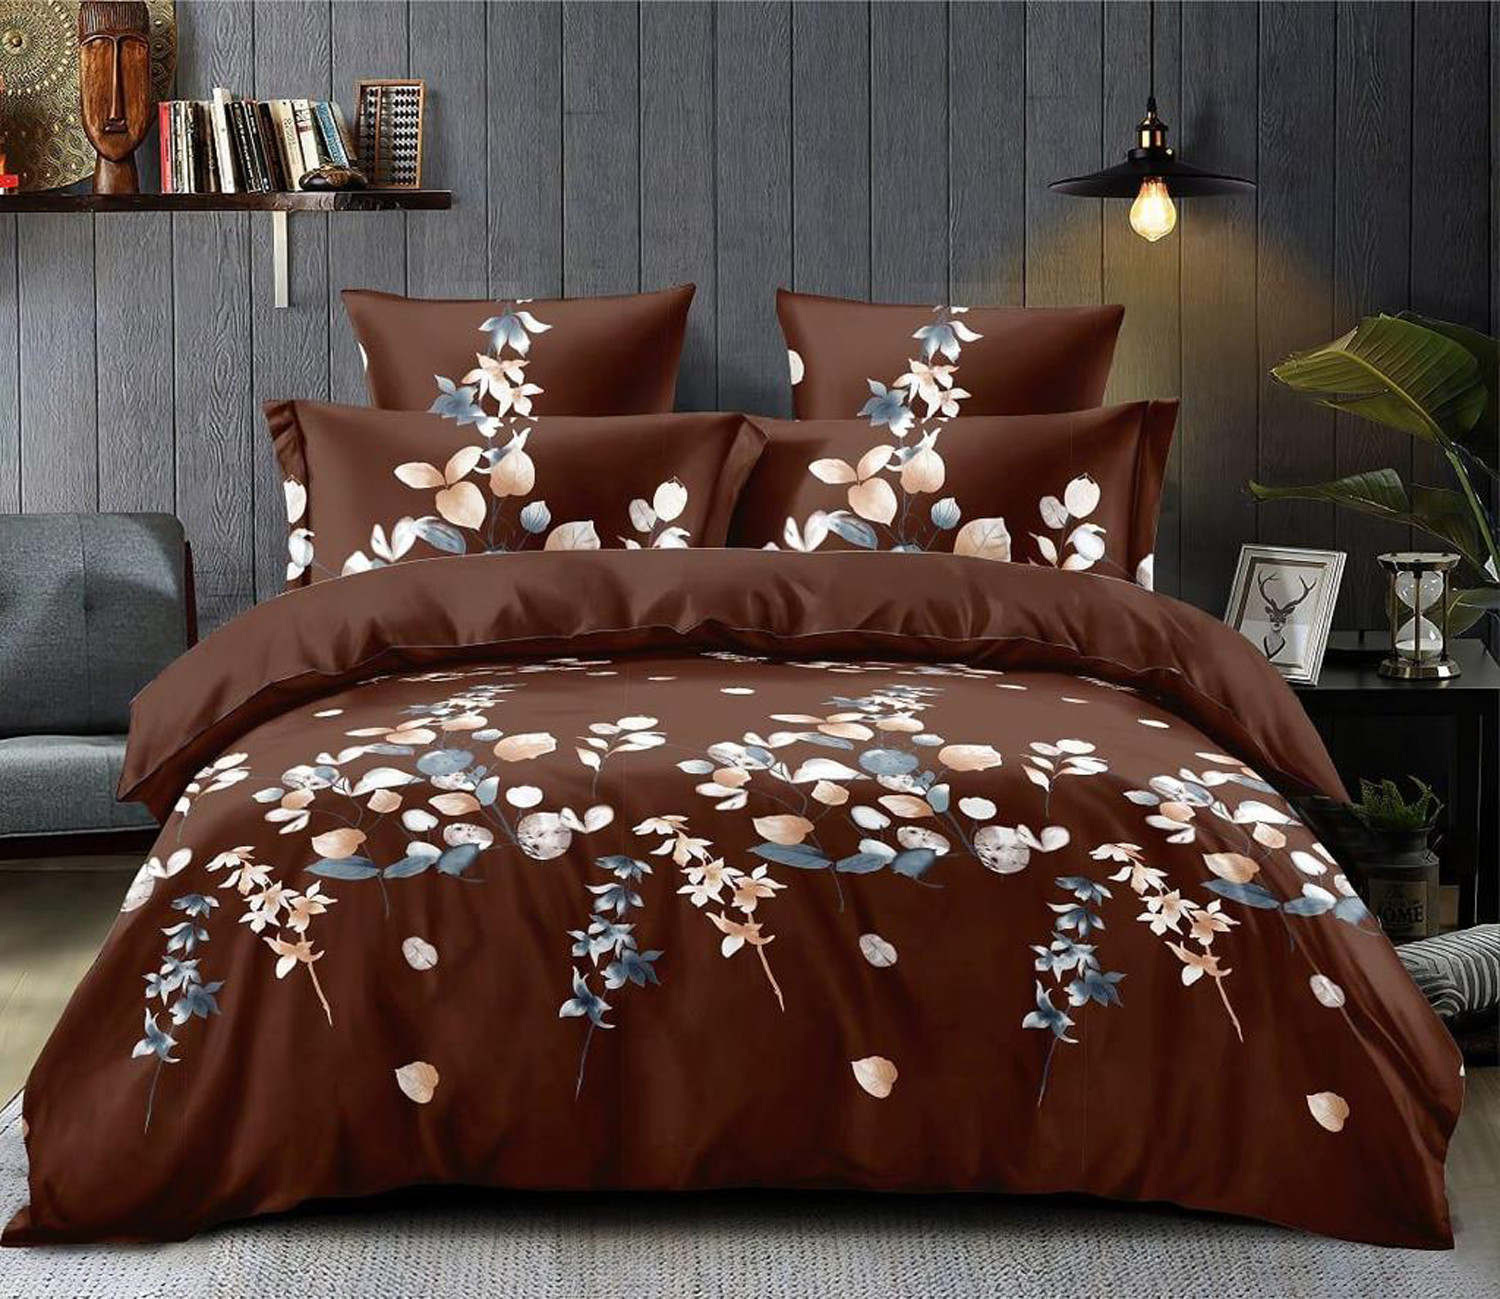 Kuber Industries Leaf Print Glace Cotton Double Bedsheet with 2 Pillow Covers (Brown)